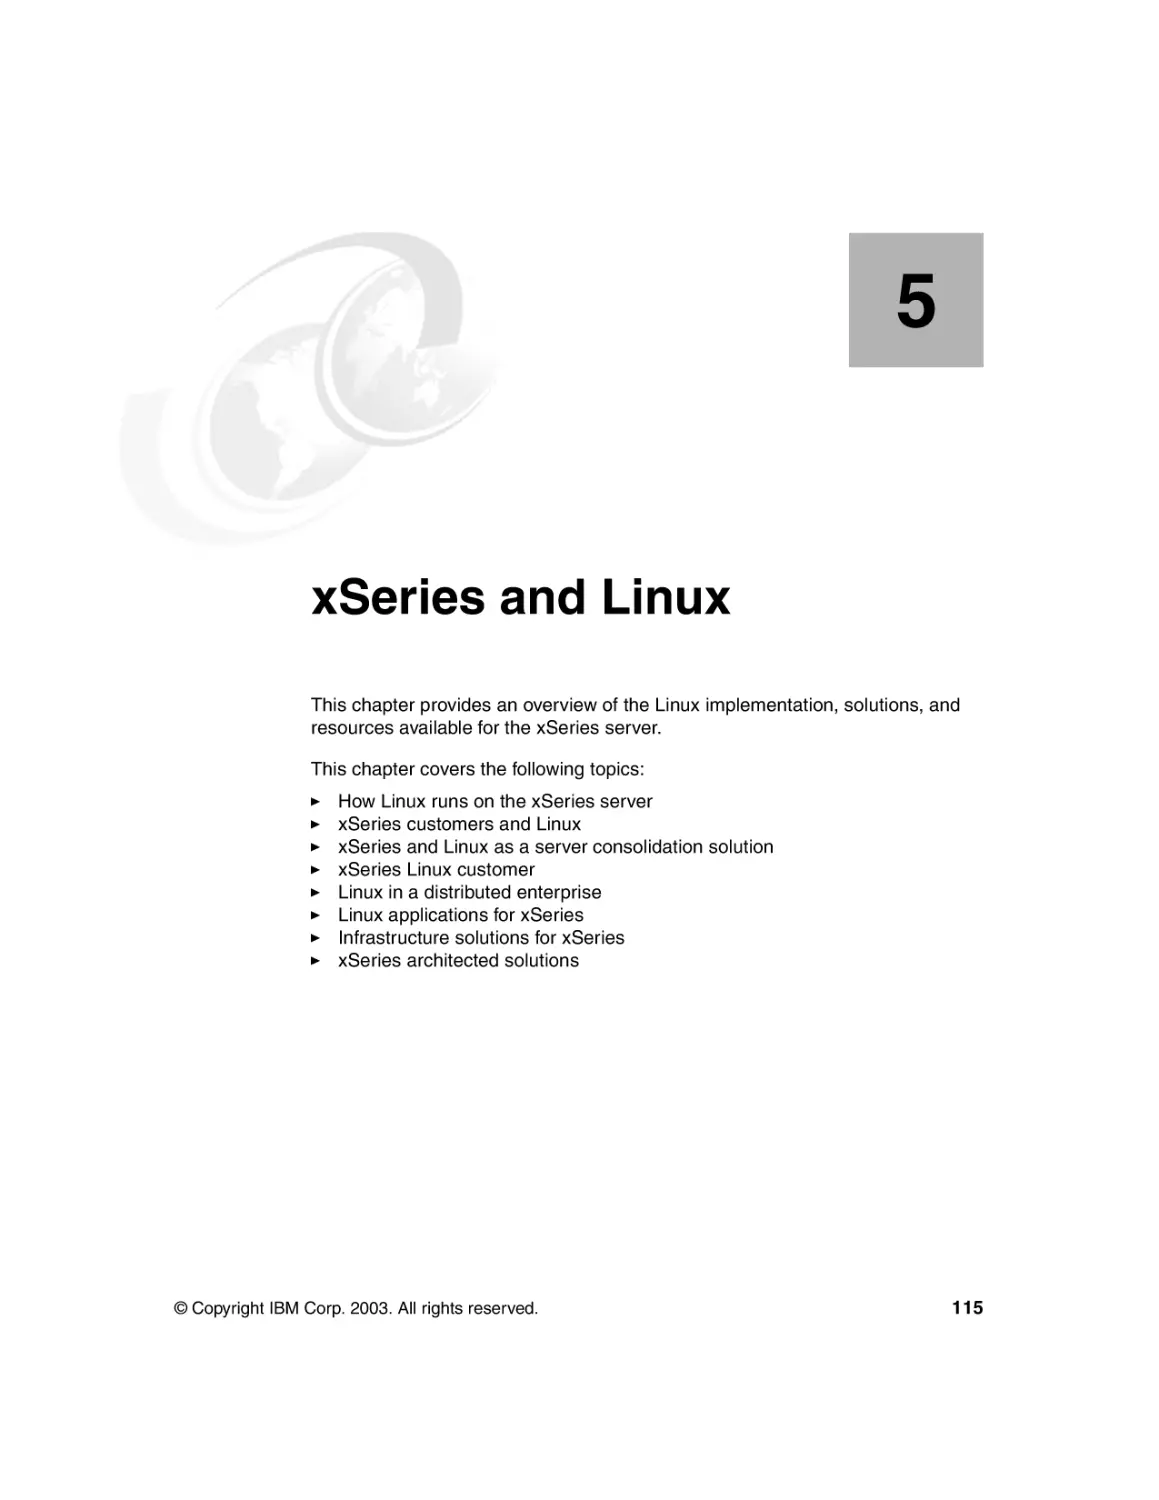 Chapter 5. xSeries and Linux